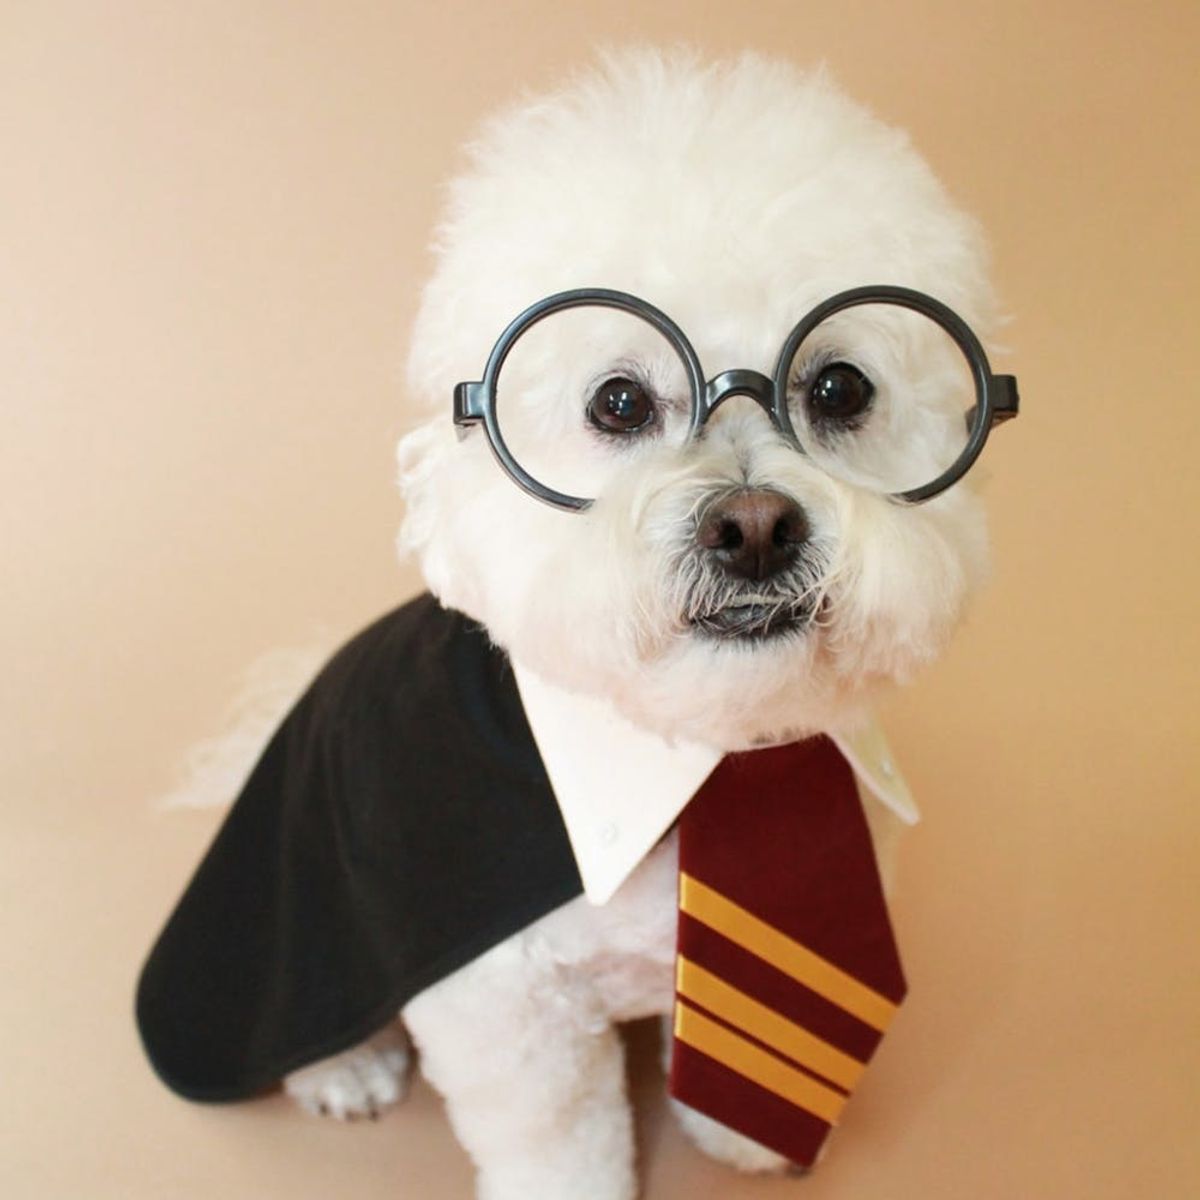 17 Harry Potter Names Perfect for Your Magical Pet